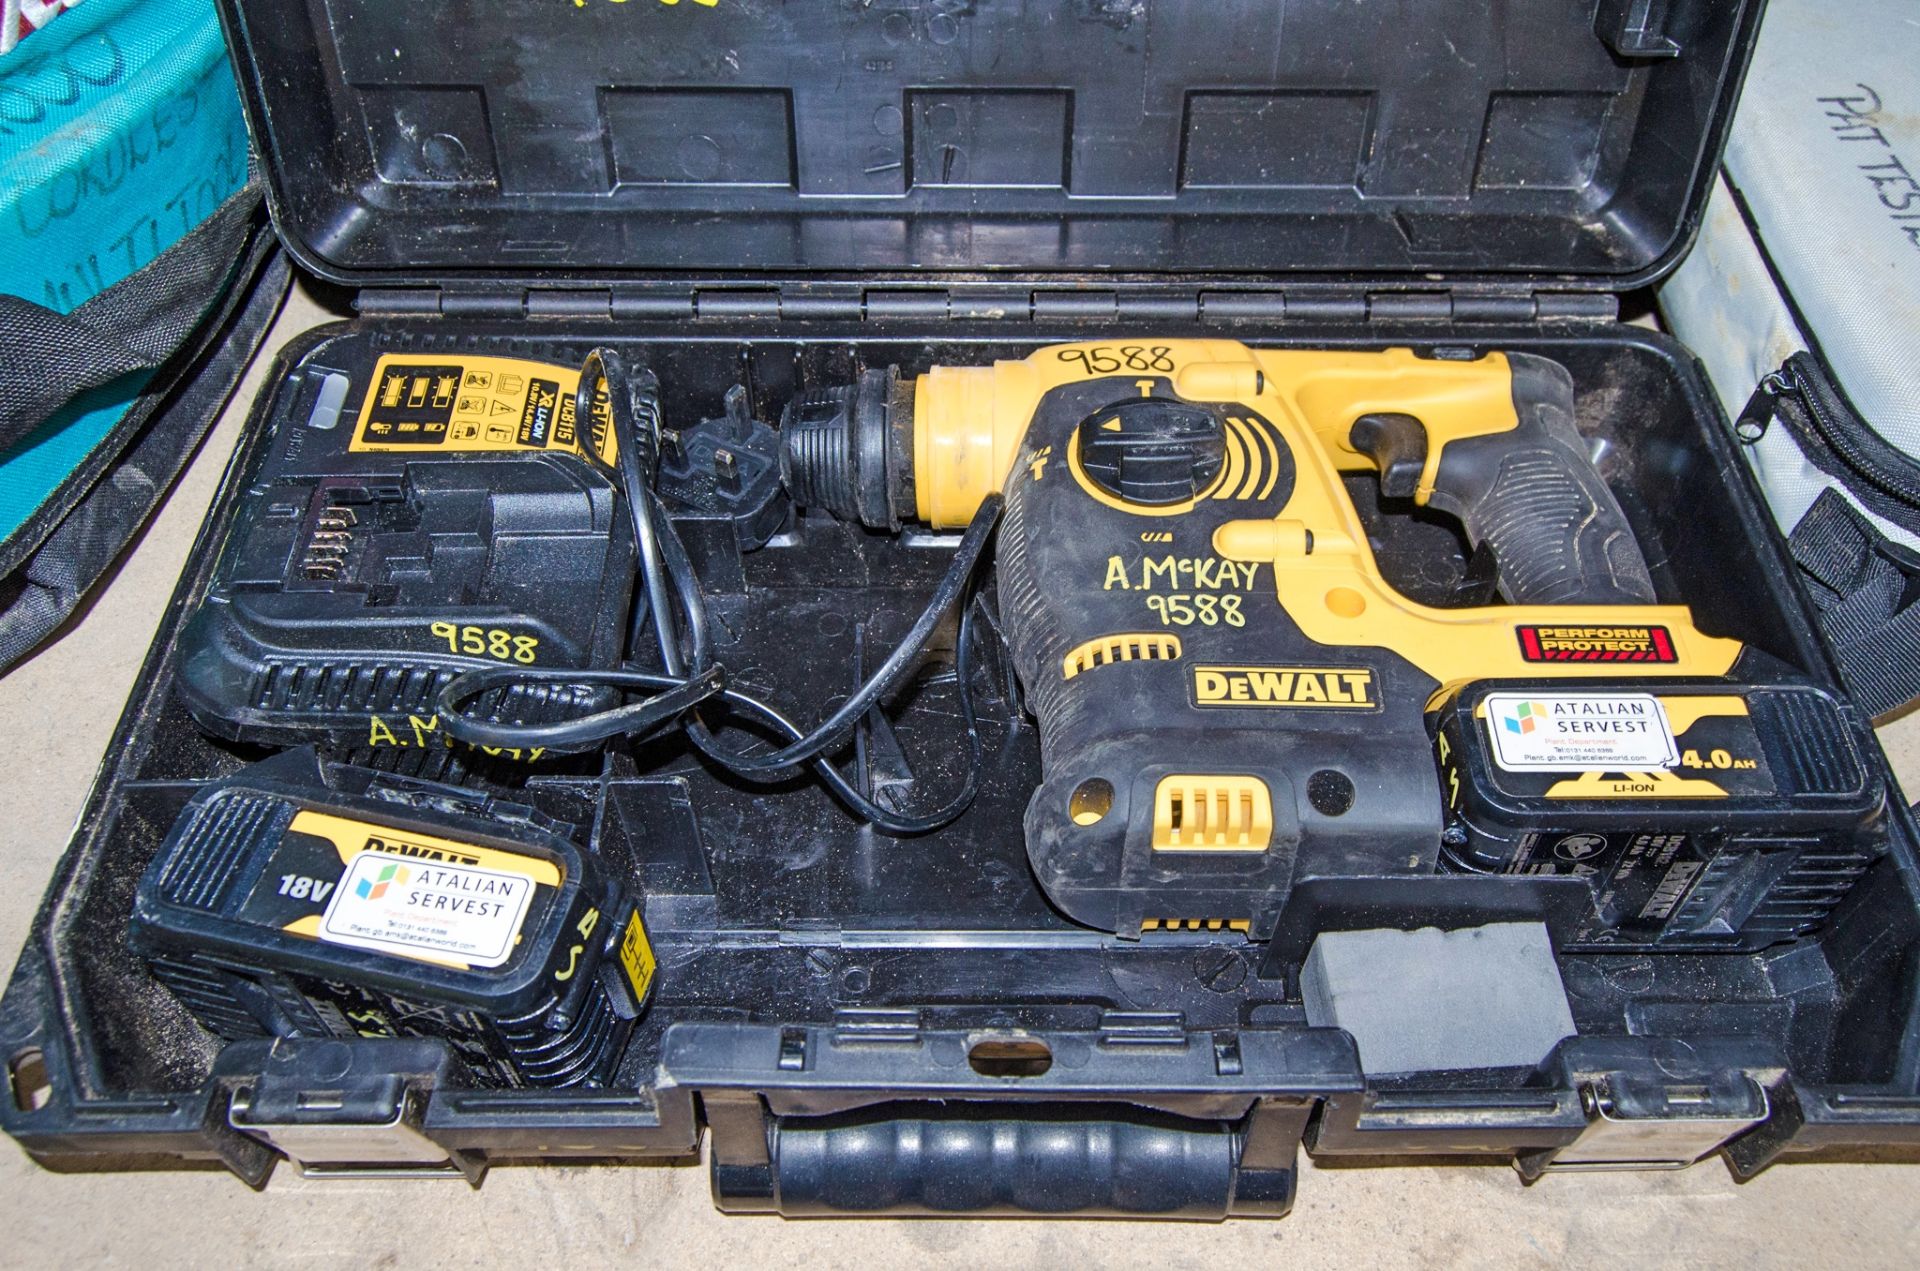 Dewalt DCH253 18v cordless SDS rotary hammer drill c/w 2 - batteries, charger and carry case AM